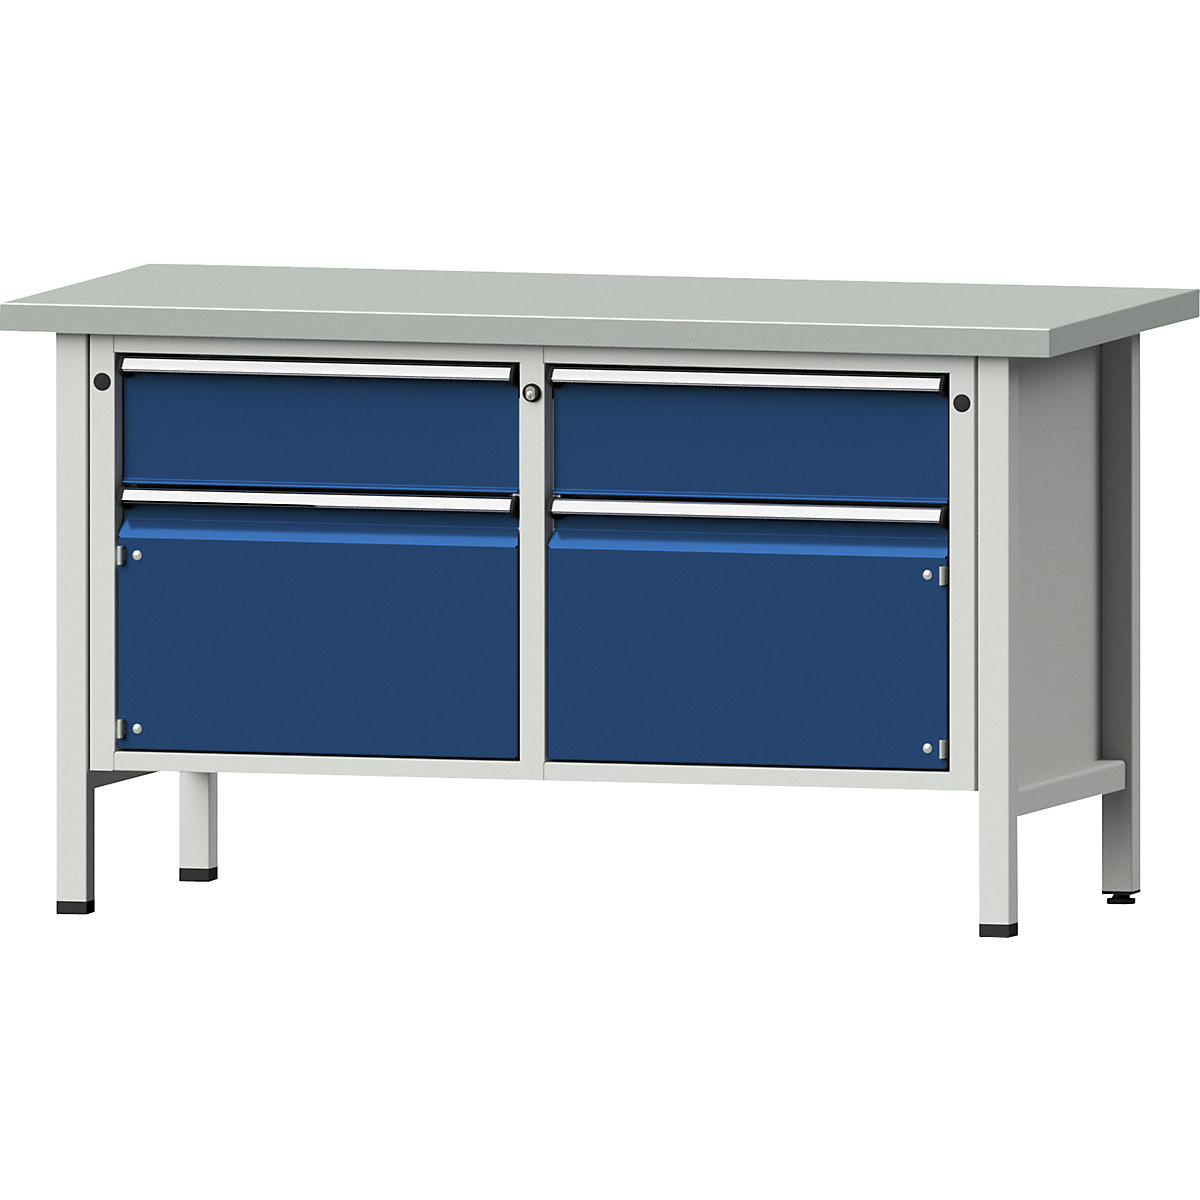 Workbench, frame construction – ANKE, 2 drawers, 2 doors, sheet steel covering, partial extension-8